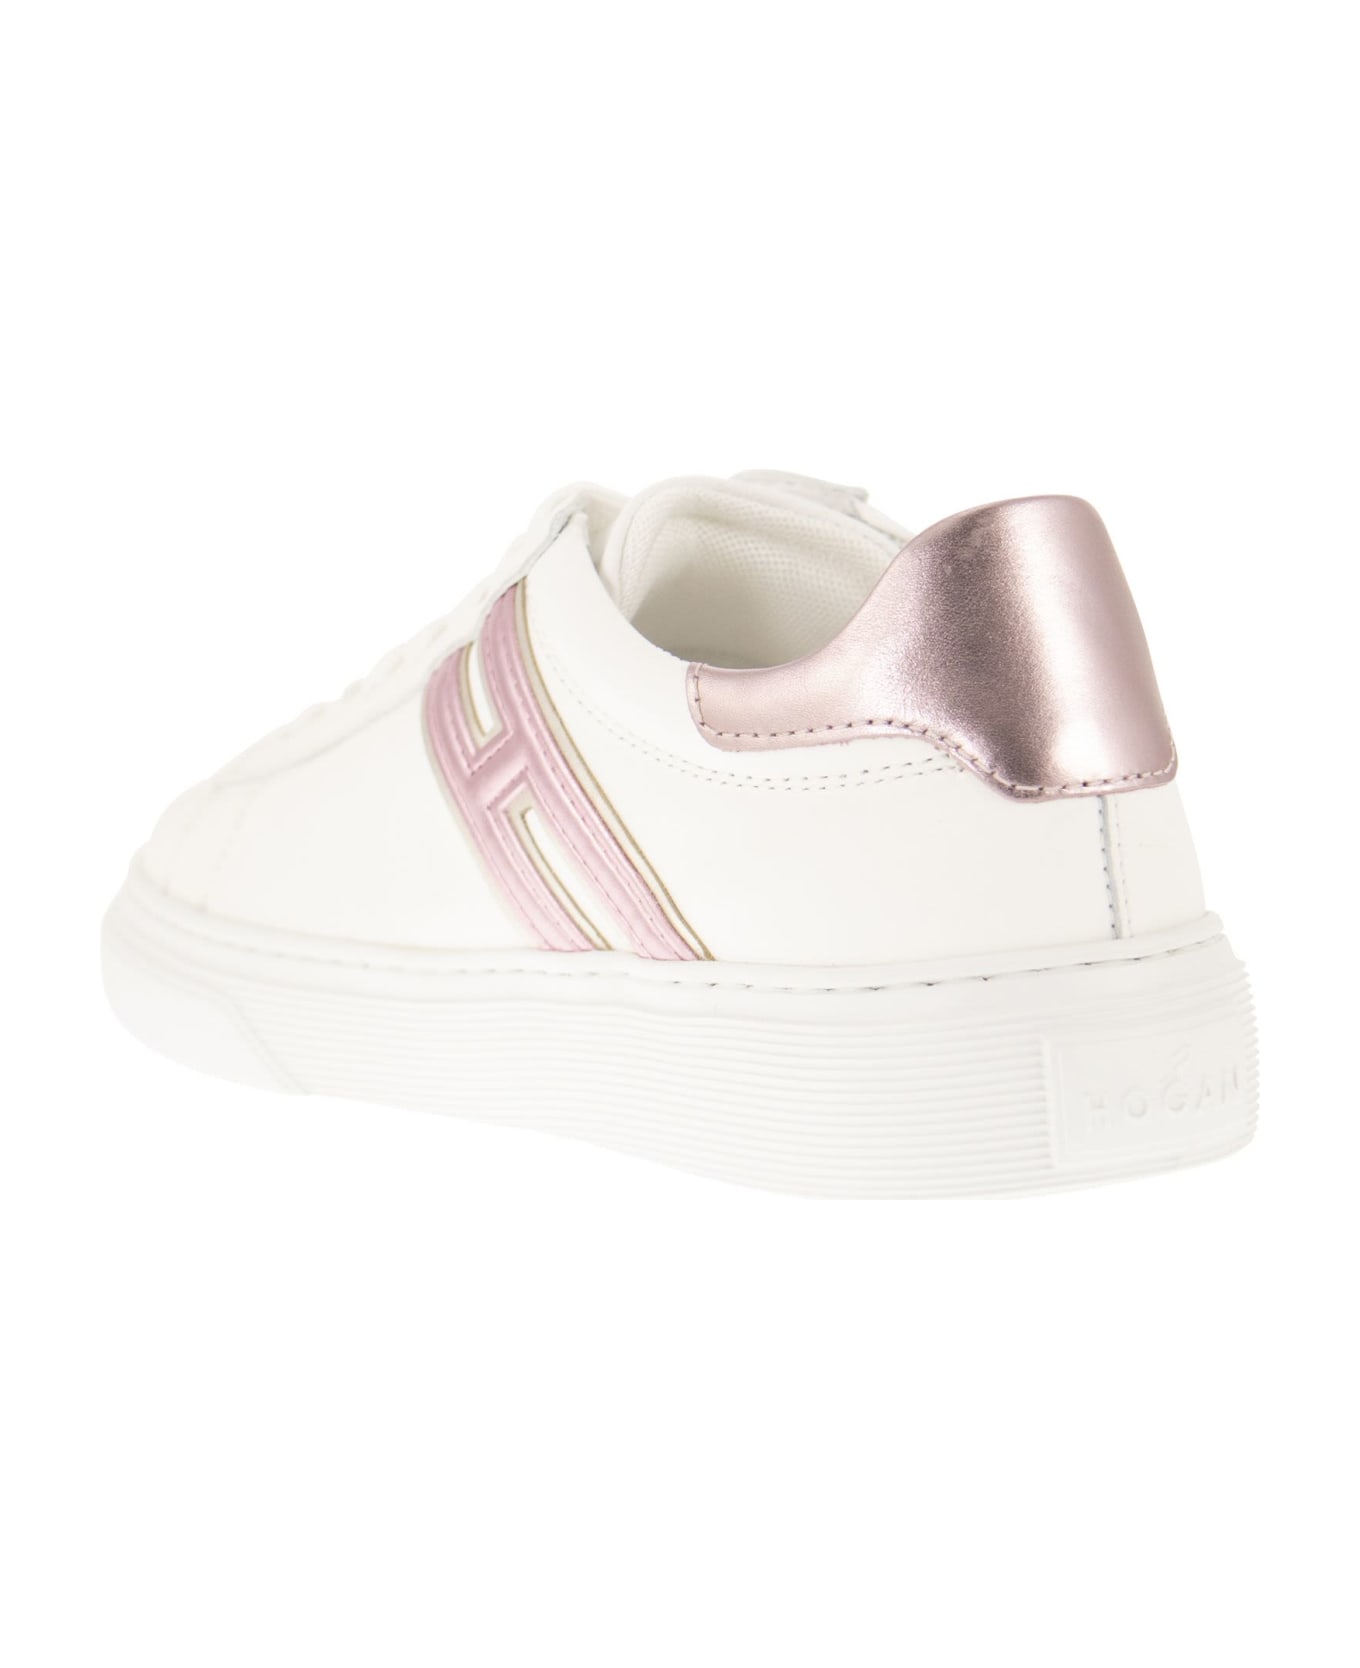 Hogan Sneakers "h365" In Leather - White/pink